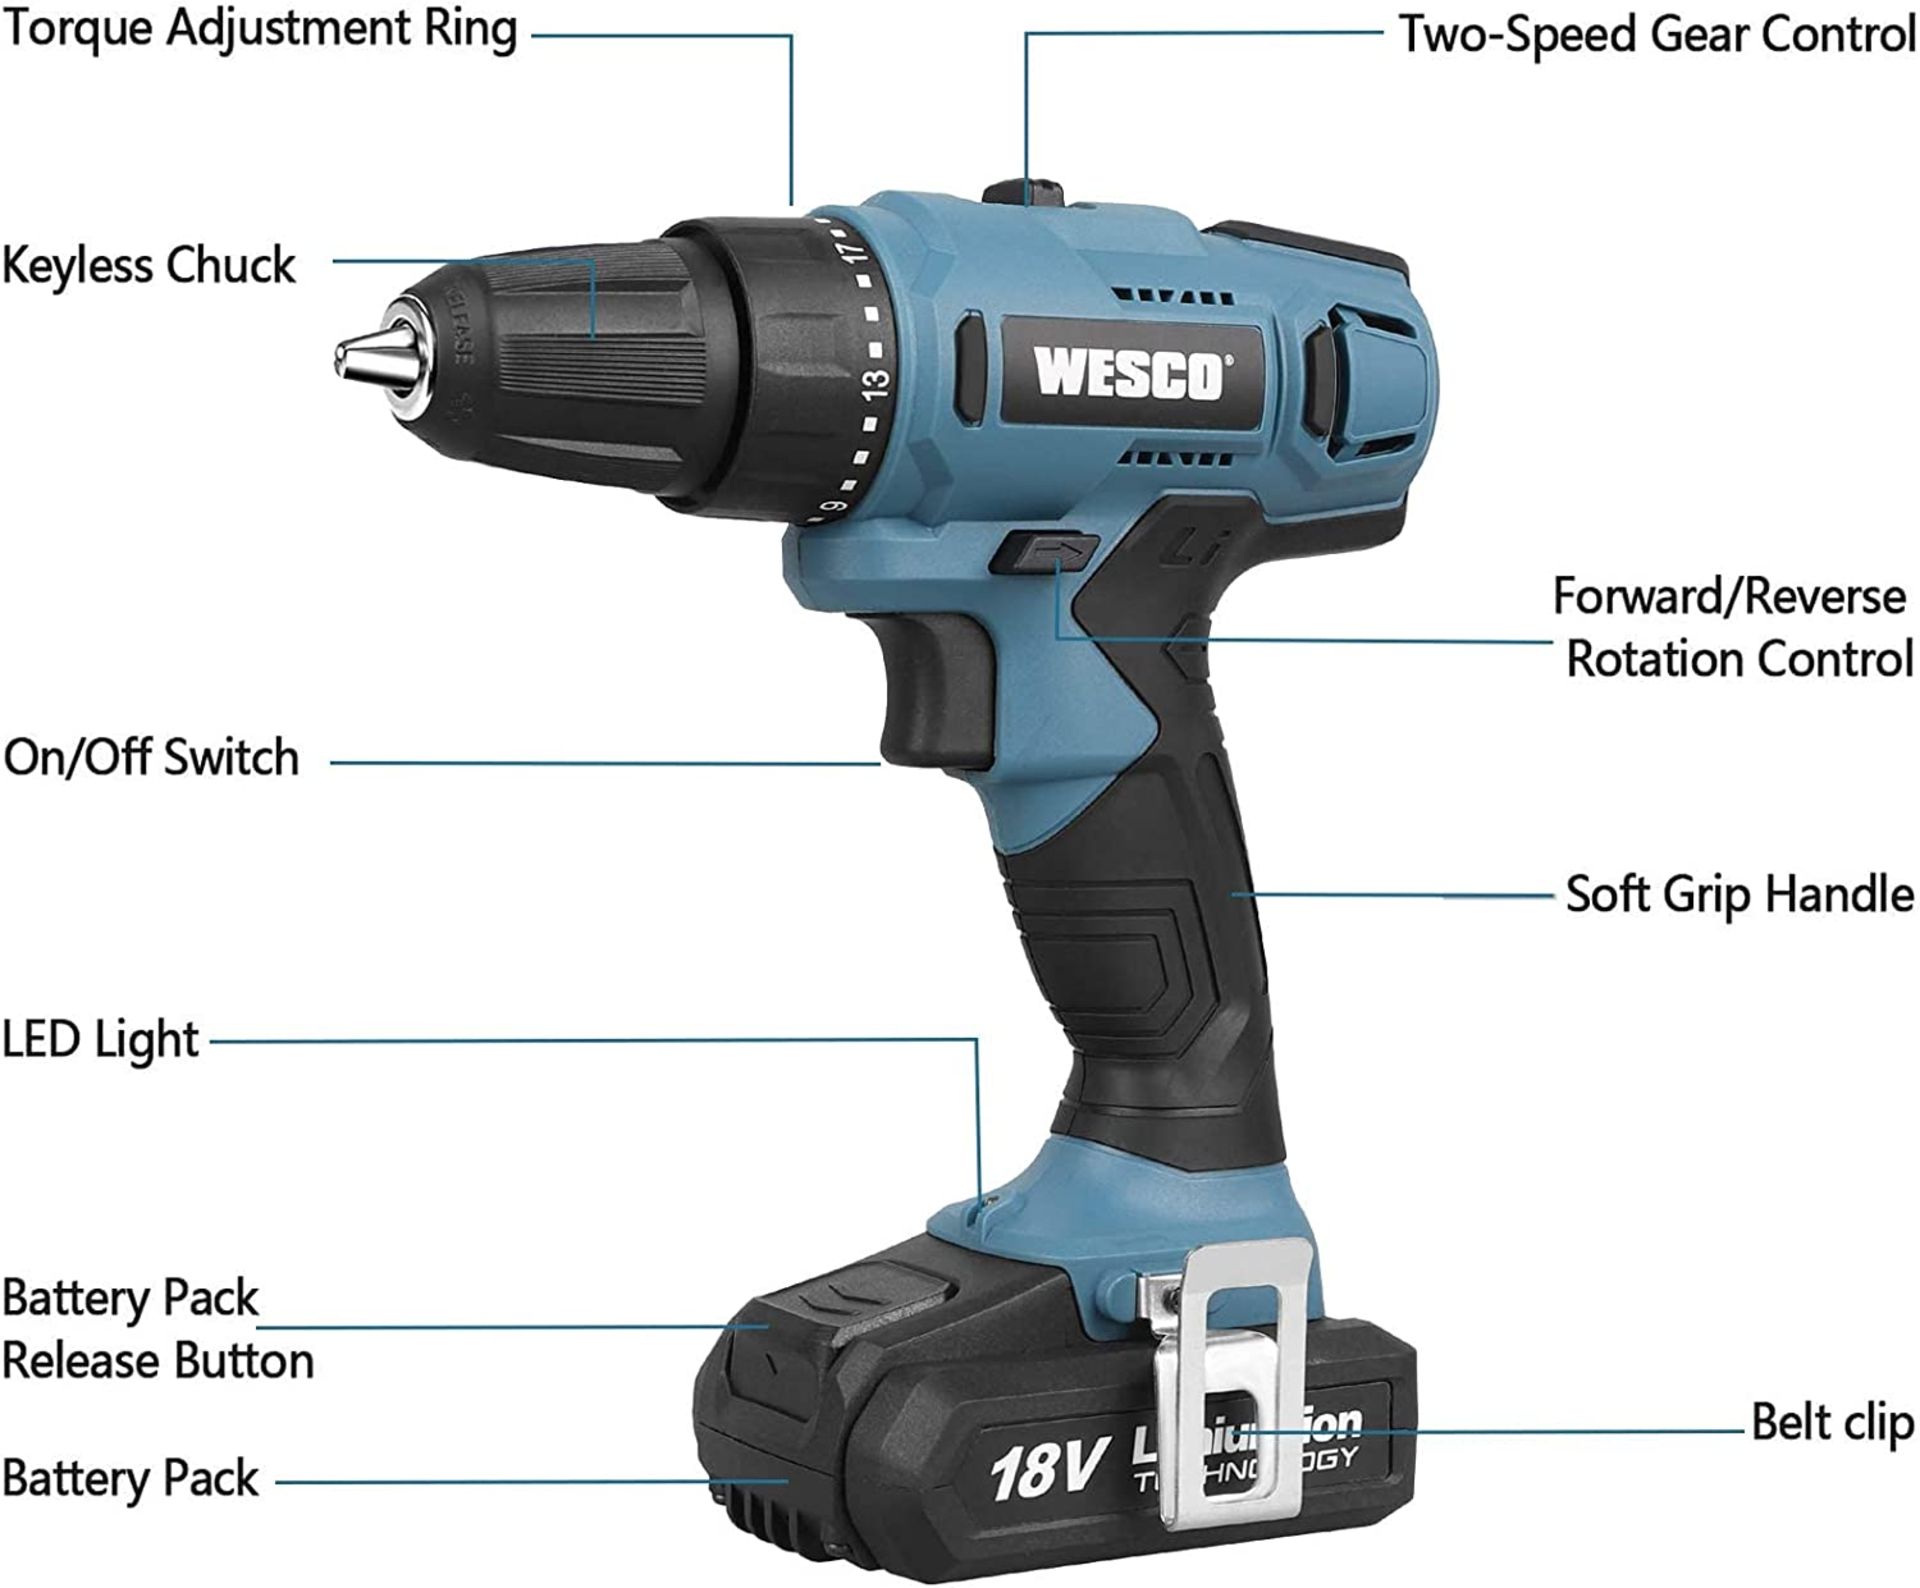 TRADE LOT 4 X NEW BOXED WESCO Cordless Drill, WESCO 18V 2.0Ah Power Combi Drill Kit with Li-ion - Image 2 of 3